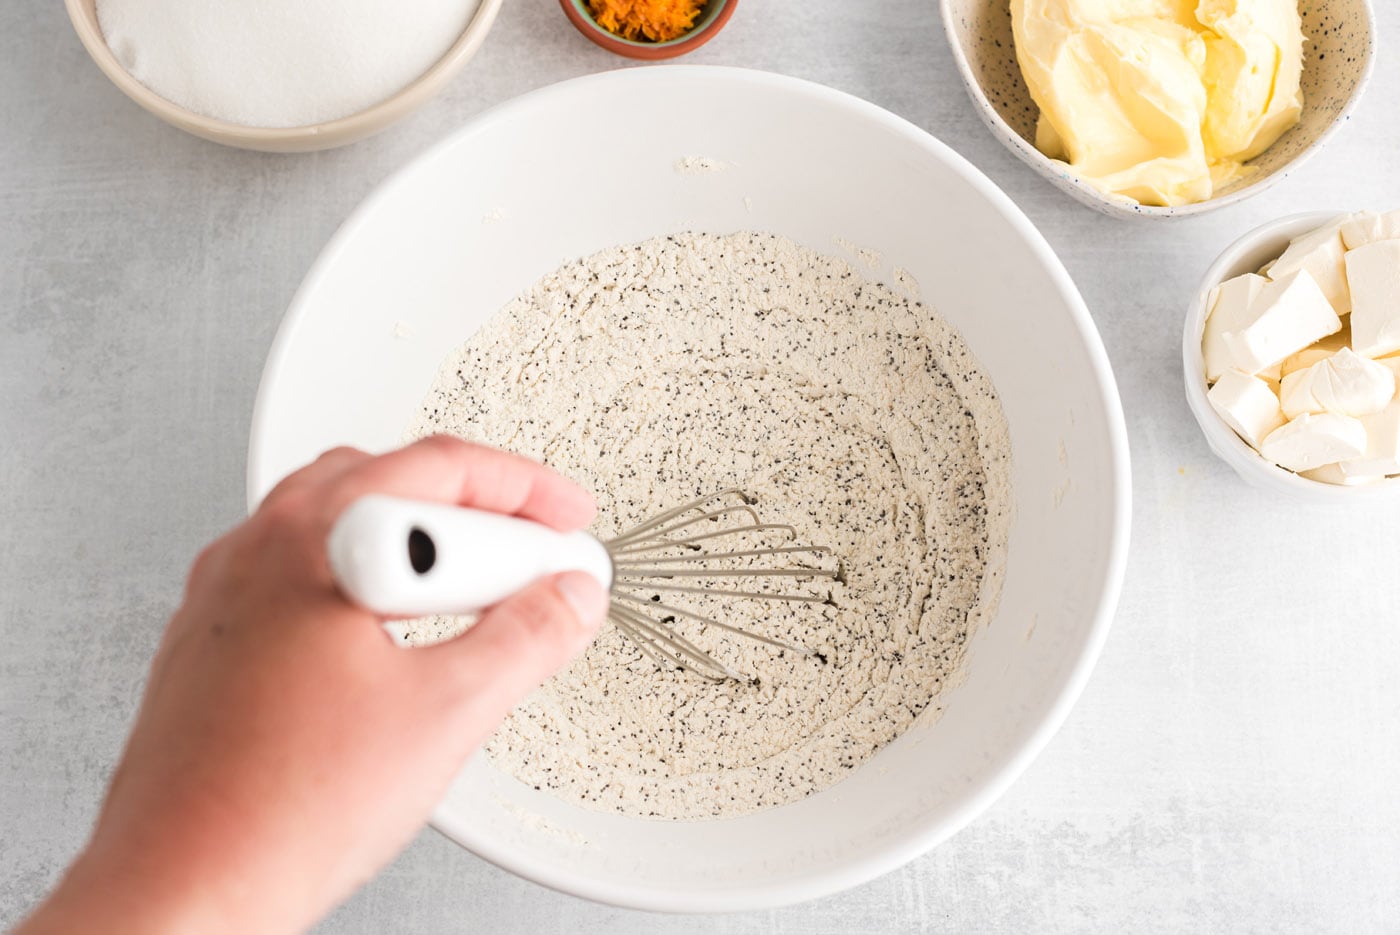 whisking together poppyseed, flour, salt, and baking powder in a bowl